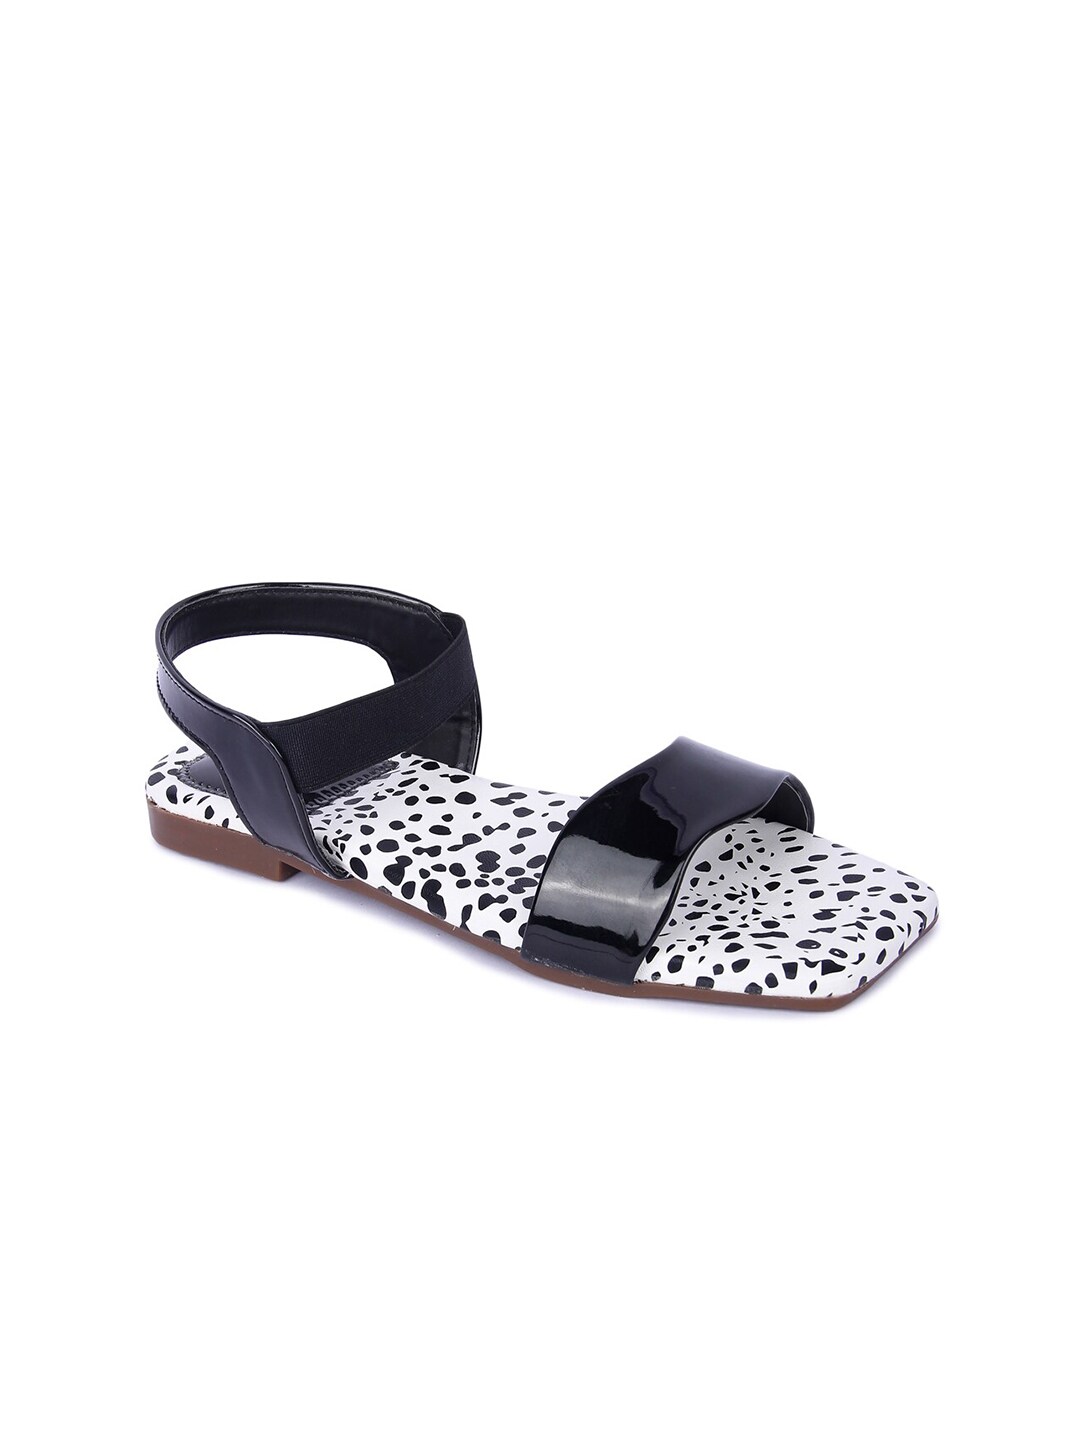 Brauch Printed Open Toe Flats Price in India